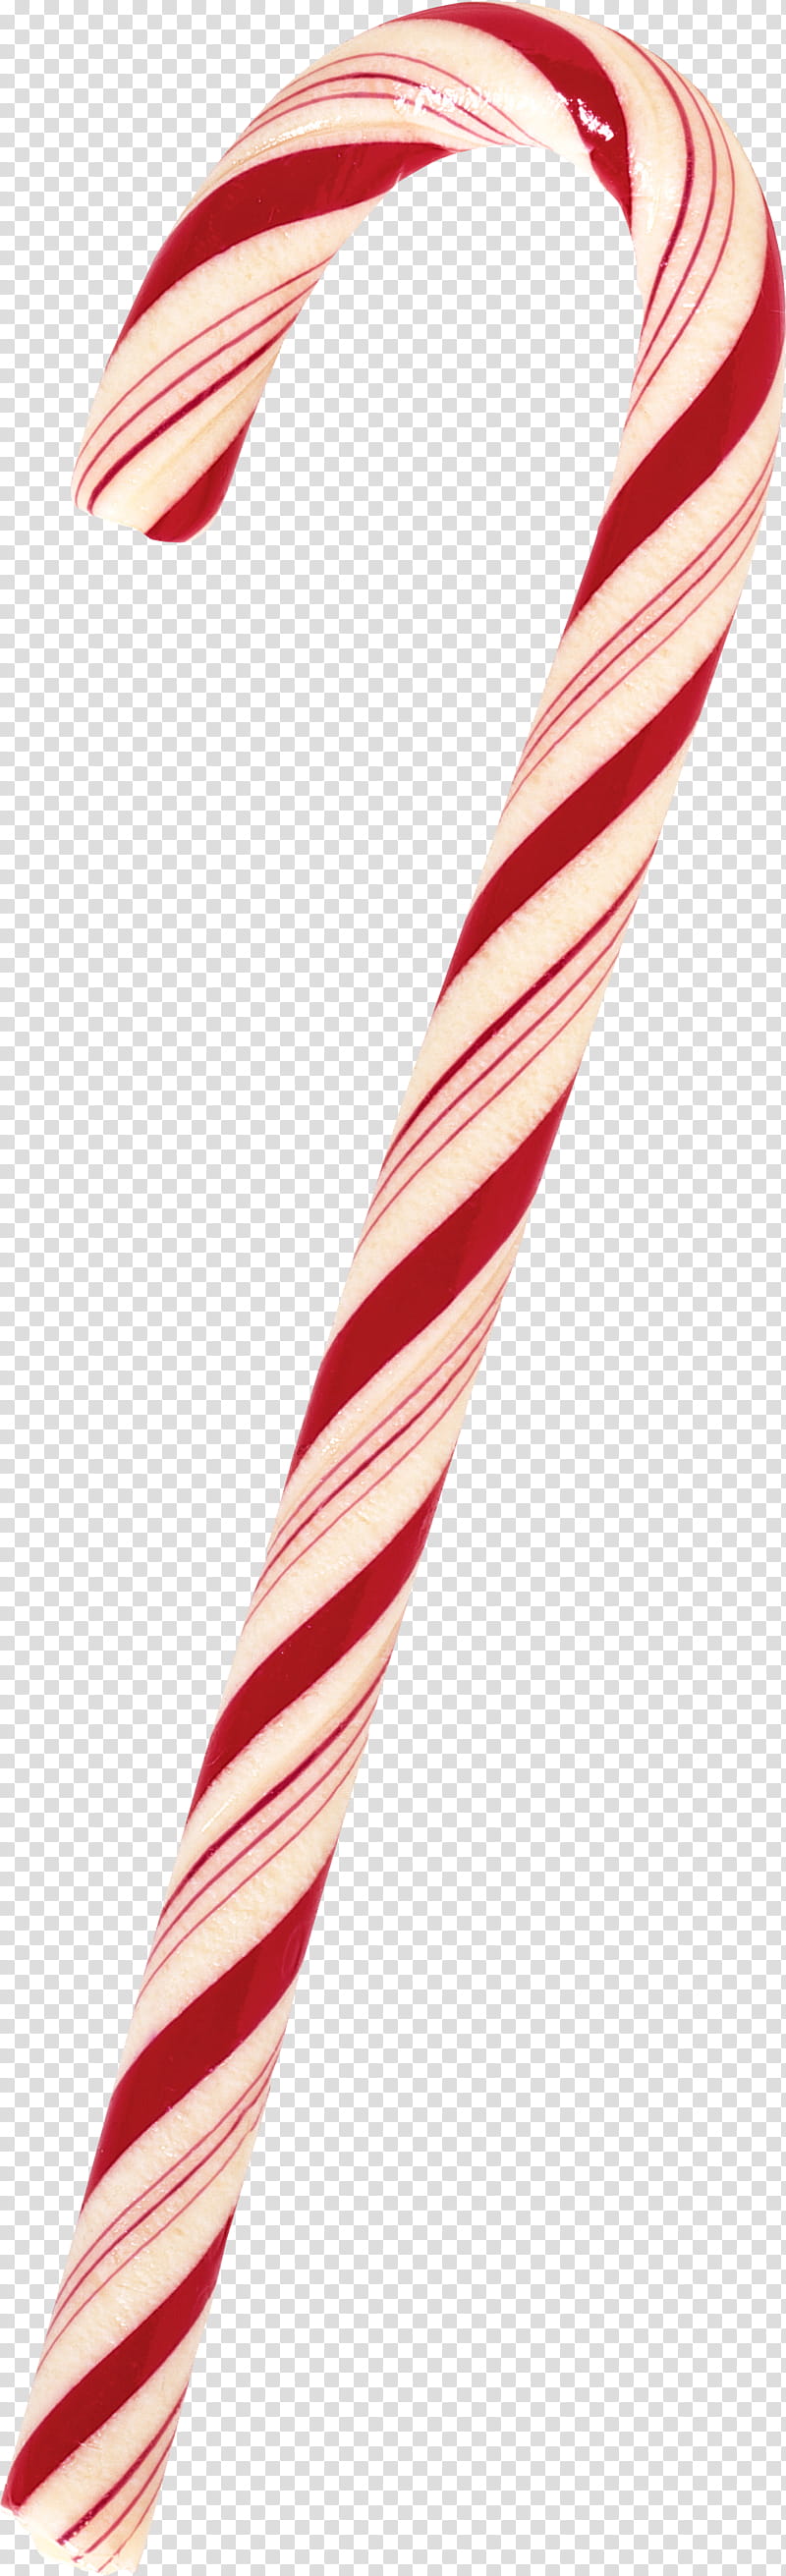 Candy cane, Stick Candy, Red, Polkagris, Pink, Confectionery, Holiday, Christmas transparent background PNG clipart